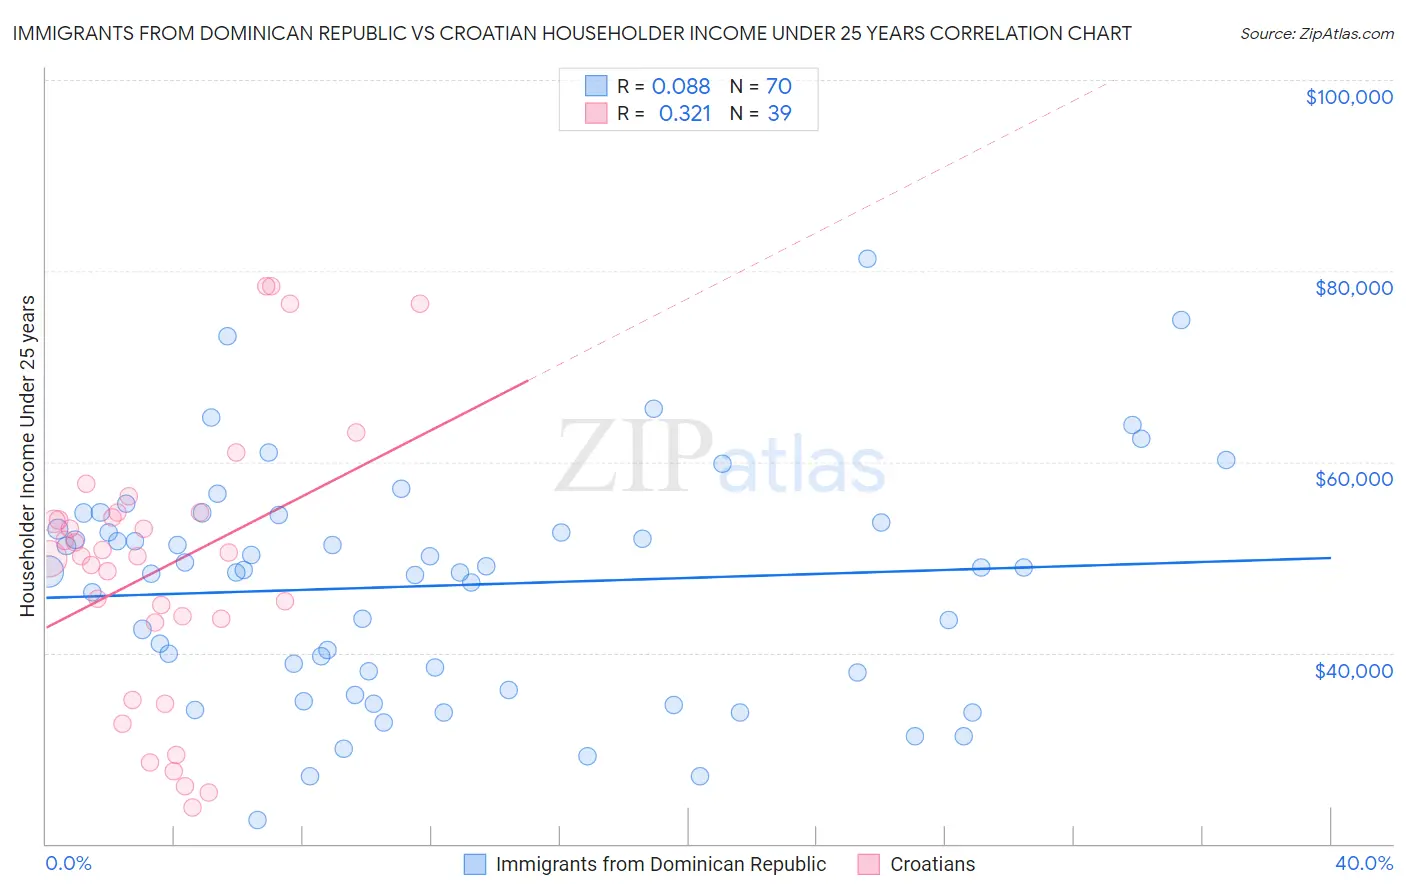 Immigrants from Dominican Republic vs Croatian Householder Income Under 25 years